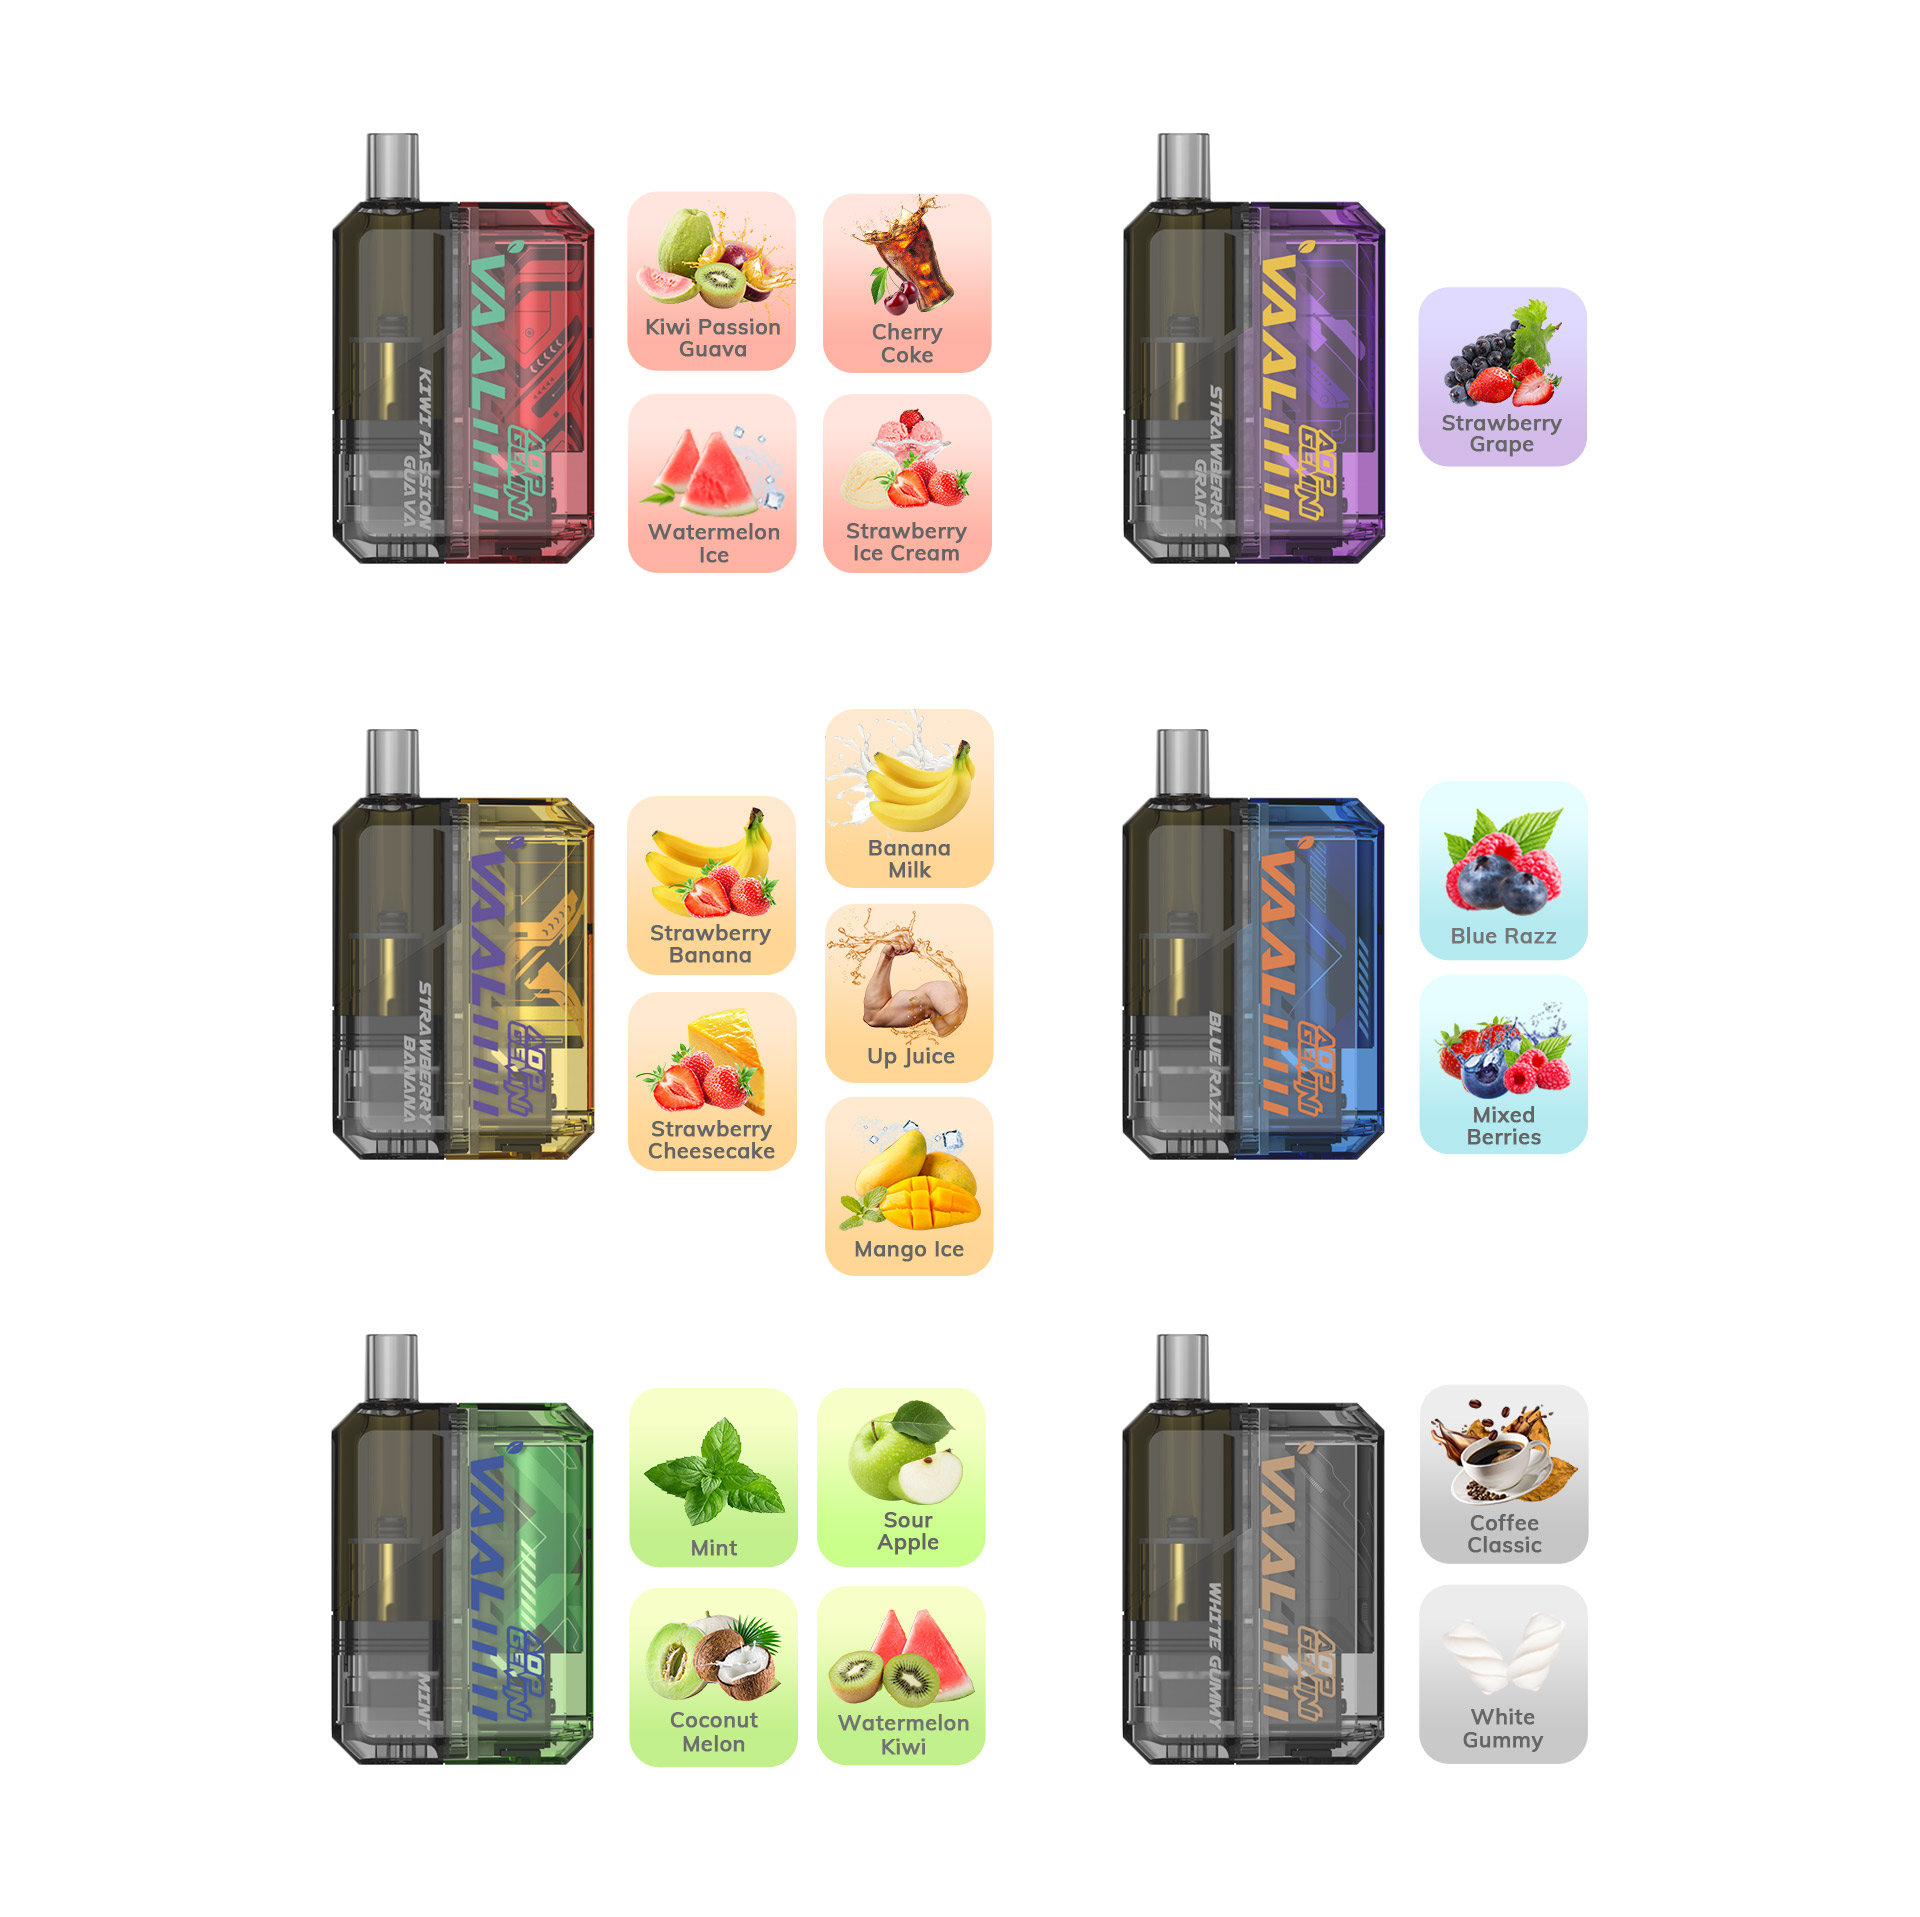 The Vaal AOP Gemini vape kit comes in a variety of flavors, including: Blue Razz, Mixed Berries, Kiwi Passion Guava, Watermelon Ice, Cherry Coke, Strawberry Ice Cream, Strawberry Grape, Mint, Coconut Melon, Sour Apple, Watermelon Kiwi, Strawberry Banana, Banana Milk, Strawberry Cheesecake, Mango Ice, Up Juice, Coffee Classic, White Gummy.